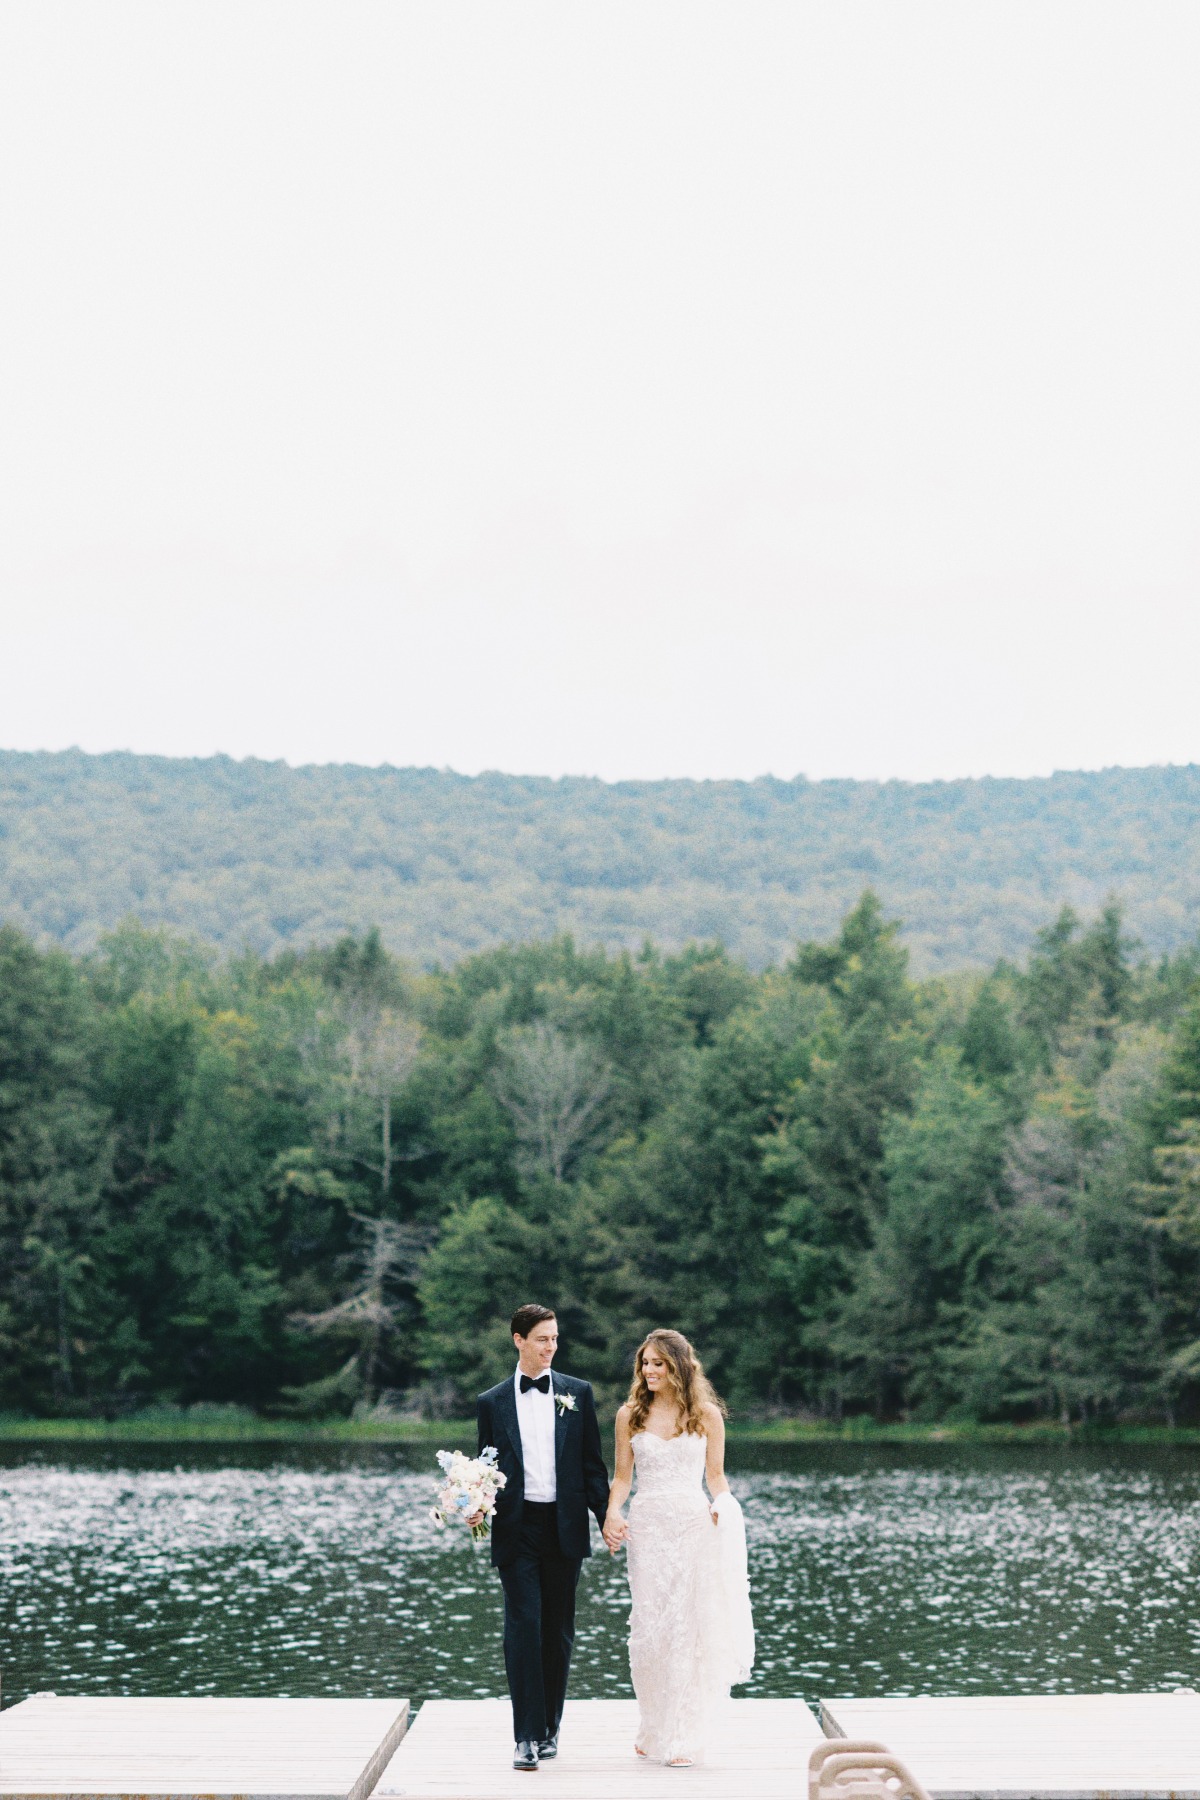 A lakeside garden party wedding in the heart of the Catskills